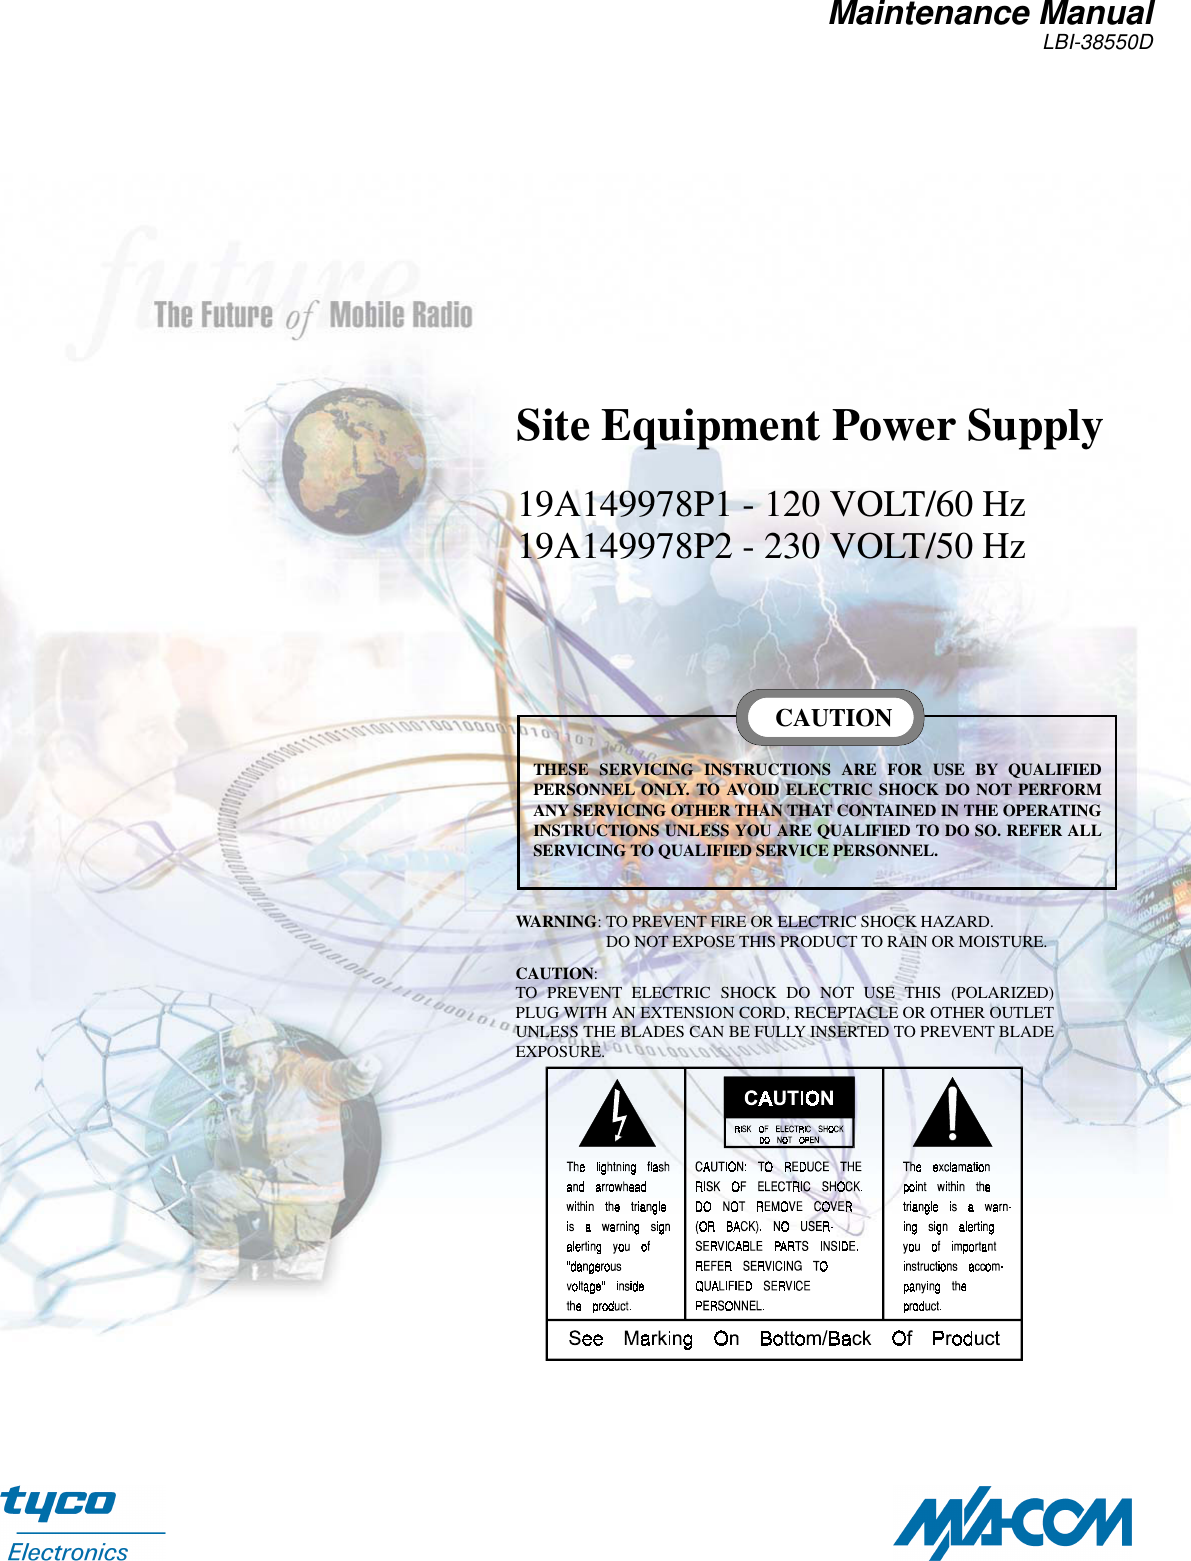 Maintenance ManualLBI-38550DSite Equipment Power Supply19A149978P1 - 120 VOLT/60 Hz19A149978P2 - 230 VOLT/50 HzTHESE SERVICING INSTRUCTIONS ARE FOR USE BY QUALIFIEDPERSONNEL ONLY. TO AVOID ELECTRIC SHOCK DO NOT PERFORMANY SERVICING OTHER THAN THAT CONTAINED IN THE OPERATINGINSTRUCTIONS UNLESS YOU ARE QUALIFIED TO DO SO. REFER ALLSERVICING TO QUALIFIED SERVICE PERSONNEL.CAUTIONWARNING: TO PREVENT FIRE OR ELECTRIC SHOCK HAZARD.                      DO NOT EXPOSE THIS PRODUCT TO RAIN OR MOISTURE.CAUTION:TO PREVENT ELECTRIC SHOCK DO NOT USE THIS (POLARIZED)PLUG WITH AN EXTENSION CORD, RECEPTACLE OR OTHER OUTLETUNLESS THE BLADES CAN BE FULLY INSERTED TO PREVENT BLADEEXPOSURE.